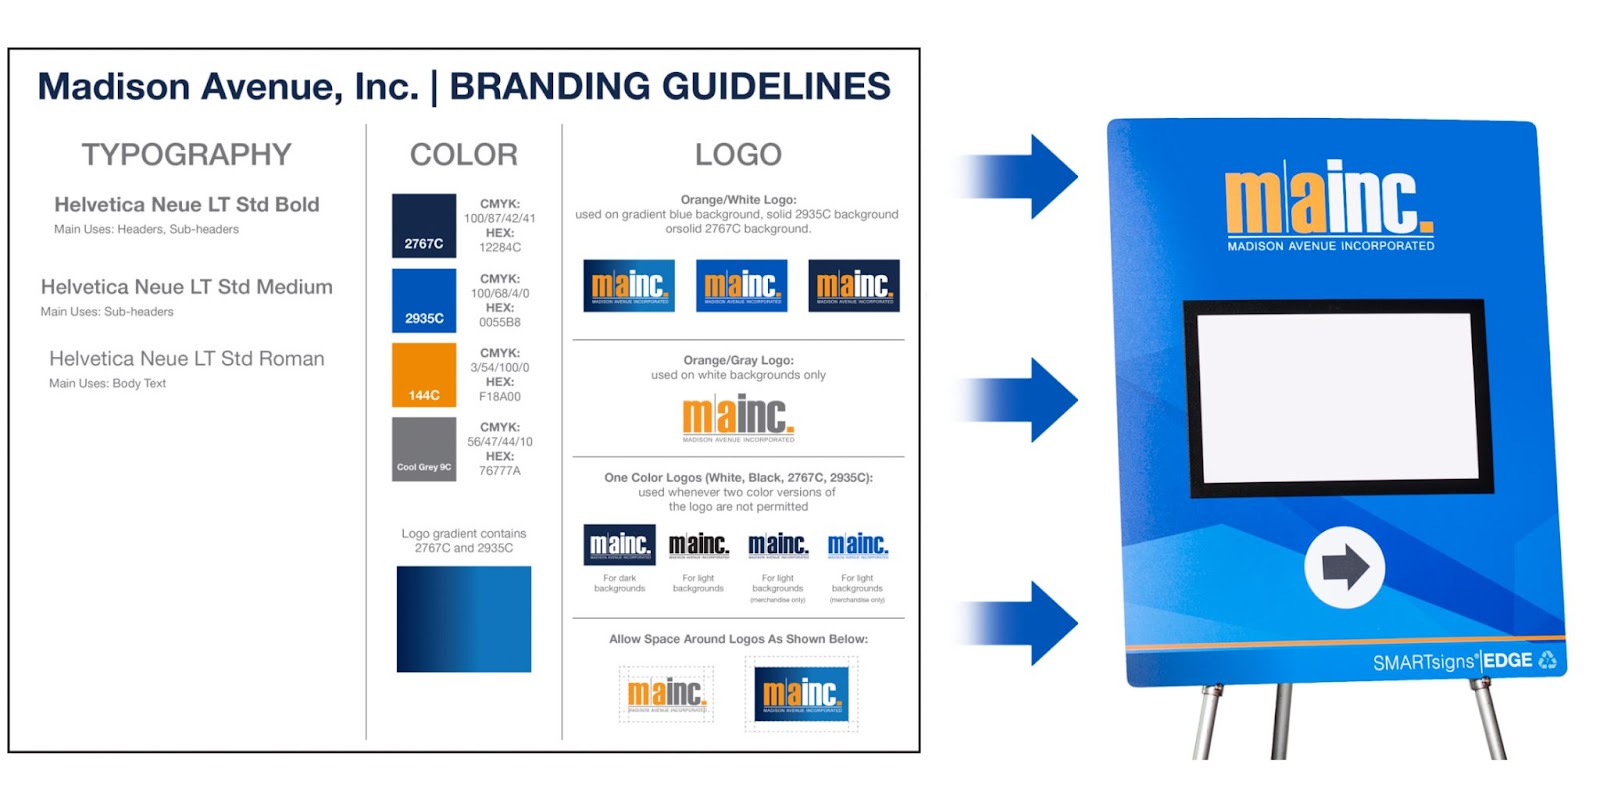 The Madison Avenue Branding Guidelines, showing our specific PMS colors, logos, and how to use them when creating graphics